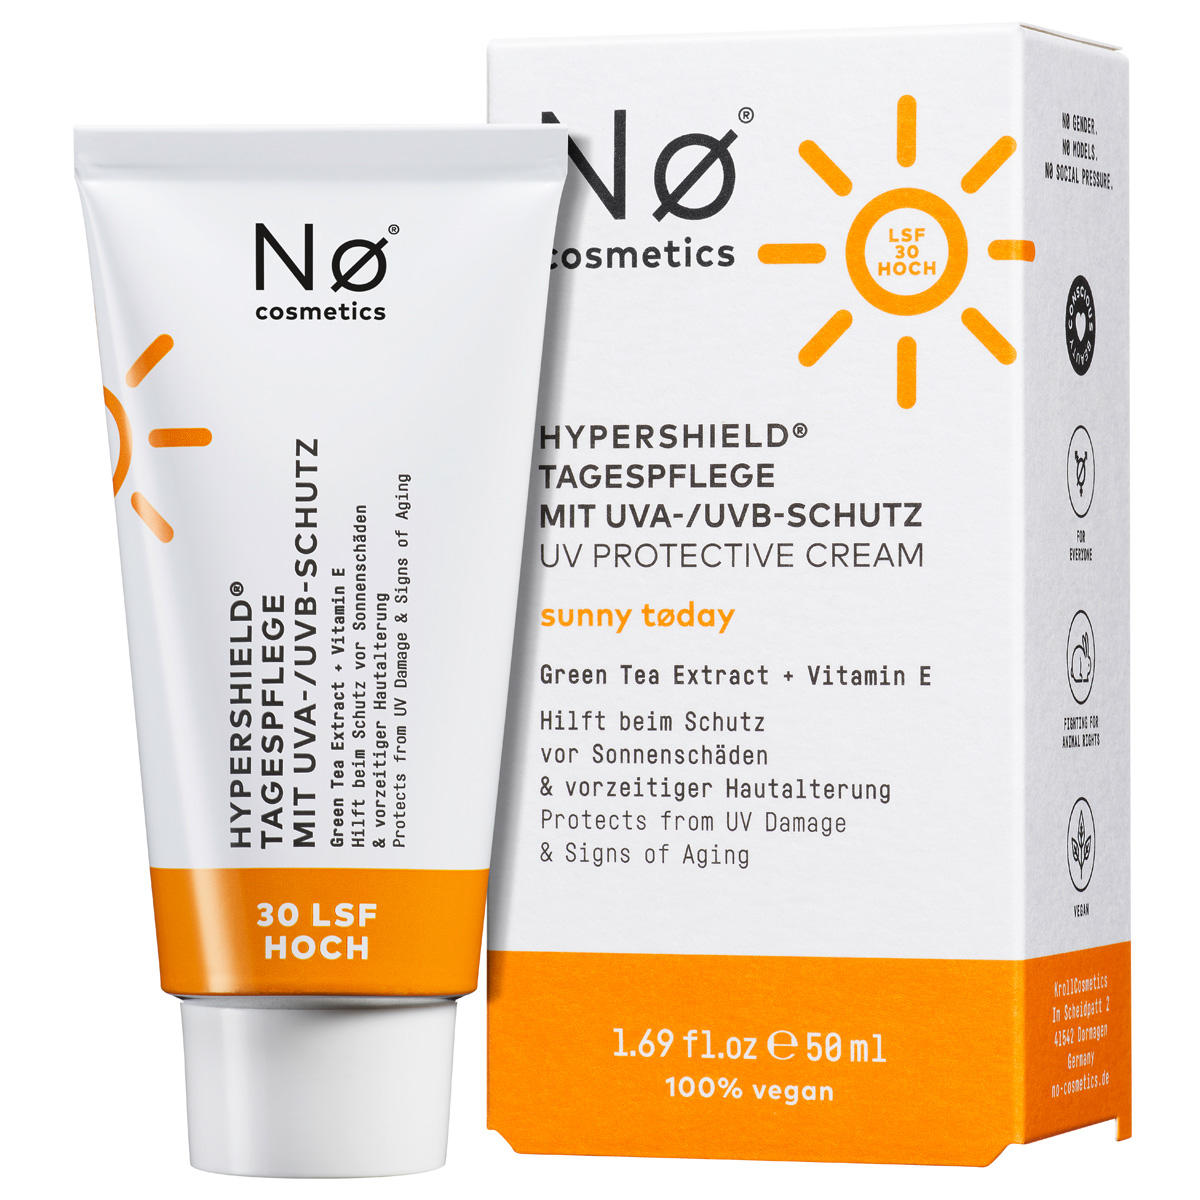 Nø Cosmetics sunny tøday Hypershield day care with UVA/UVB protection SPF 30 50 ml - 1